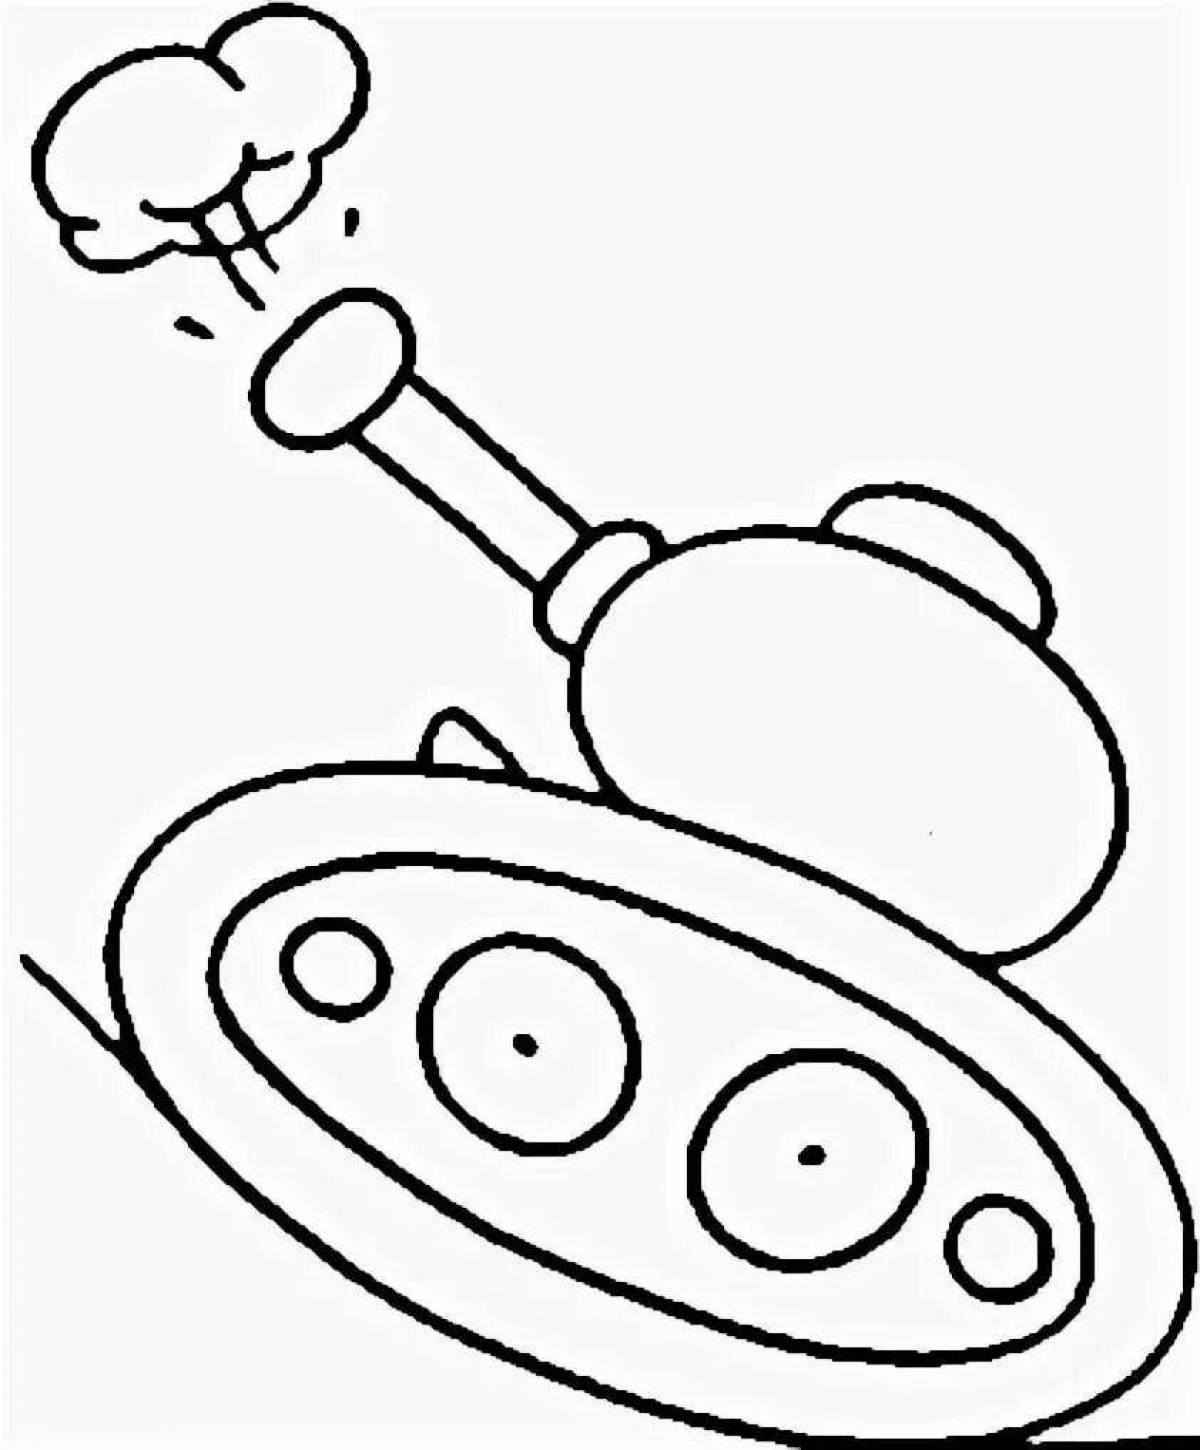 Large preschool military vehicle coloring page